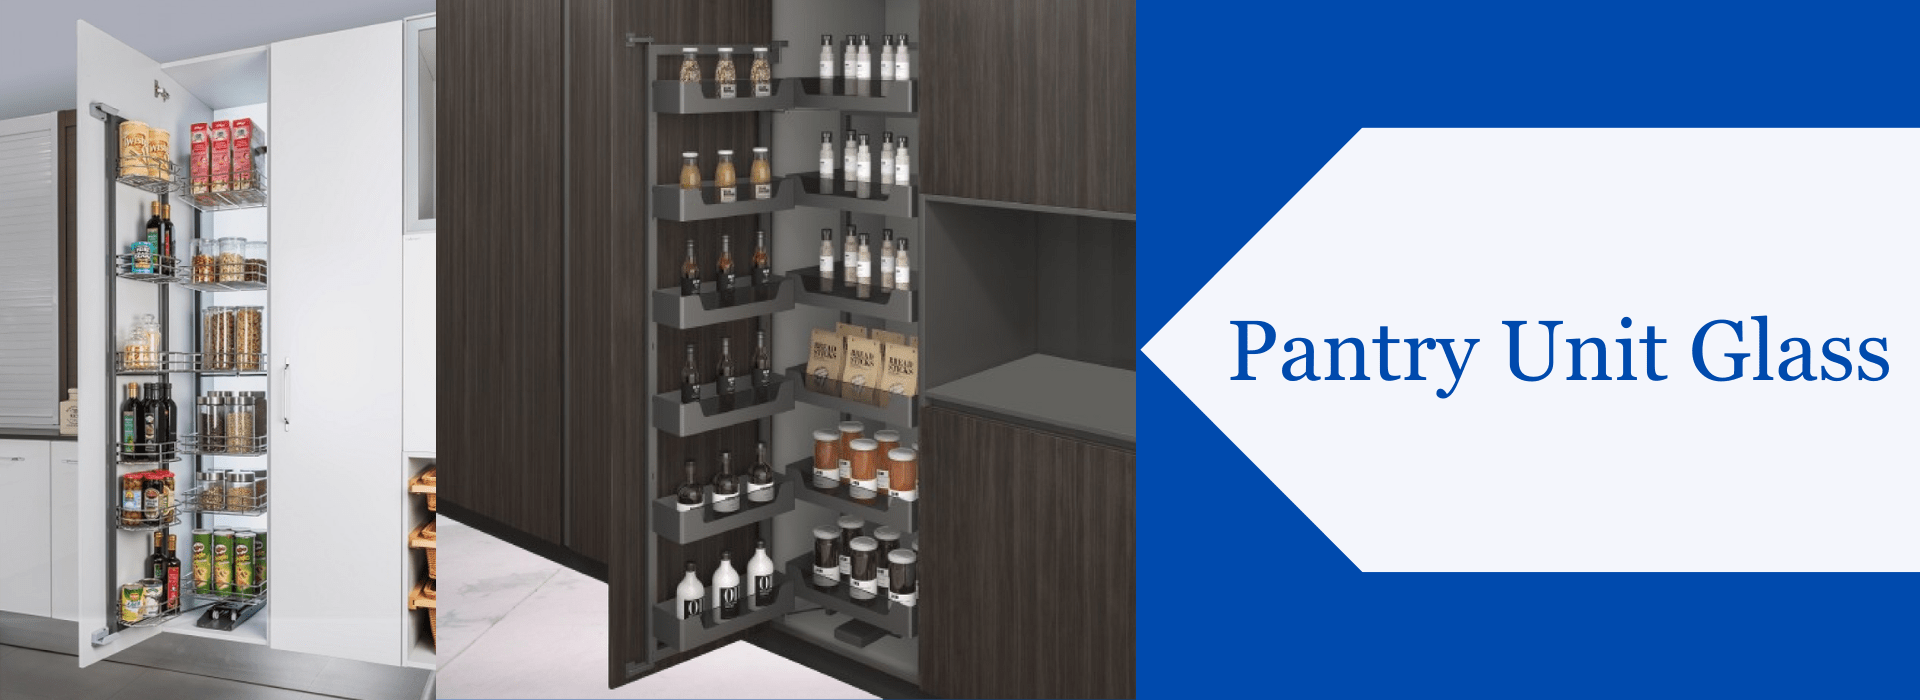 Why You Should Choose Pantry Unit Glass for Your Kitchen Storage Solution